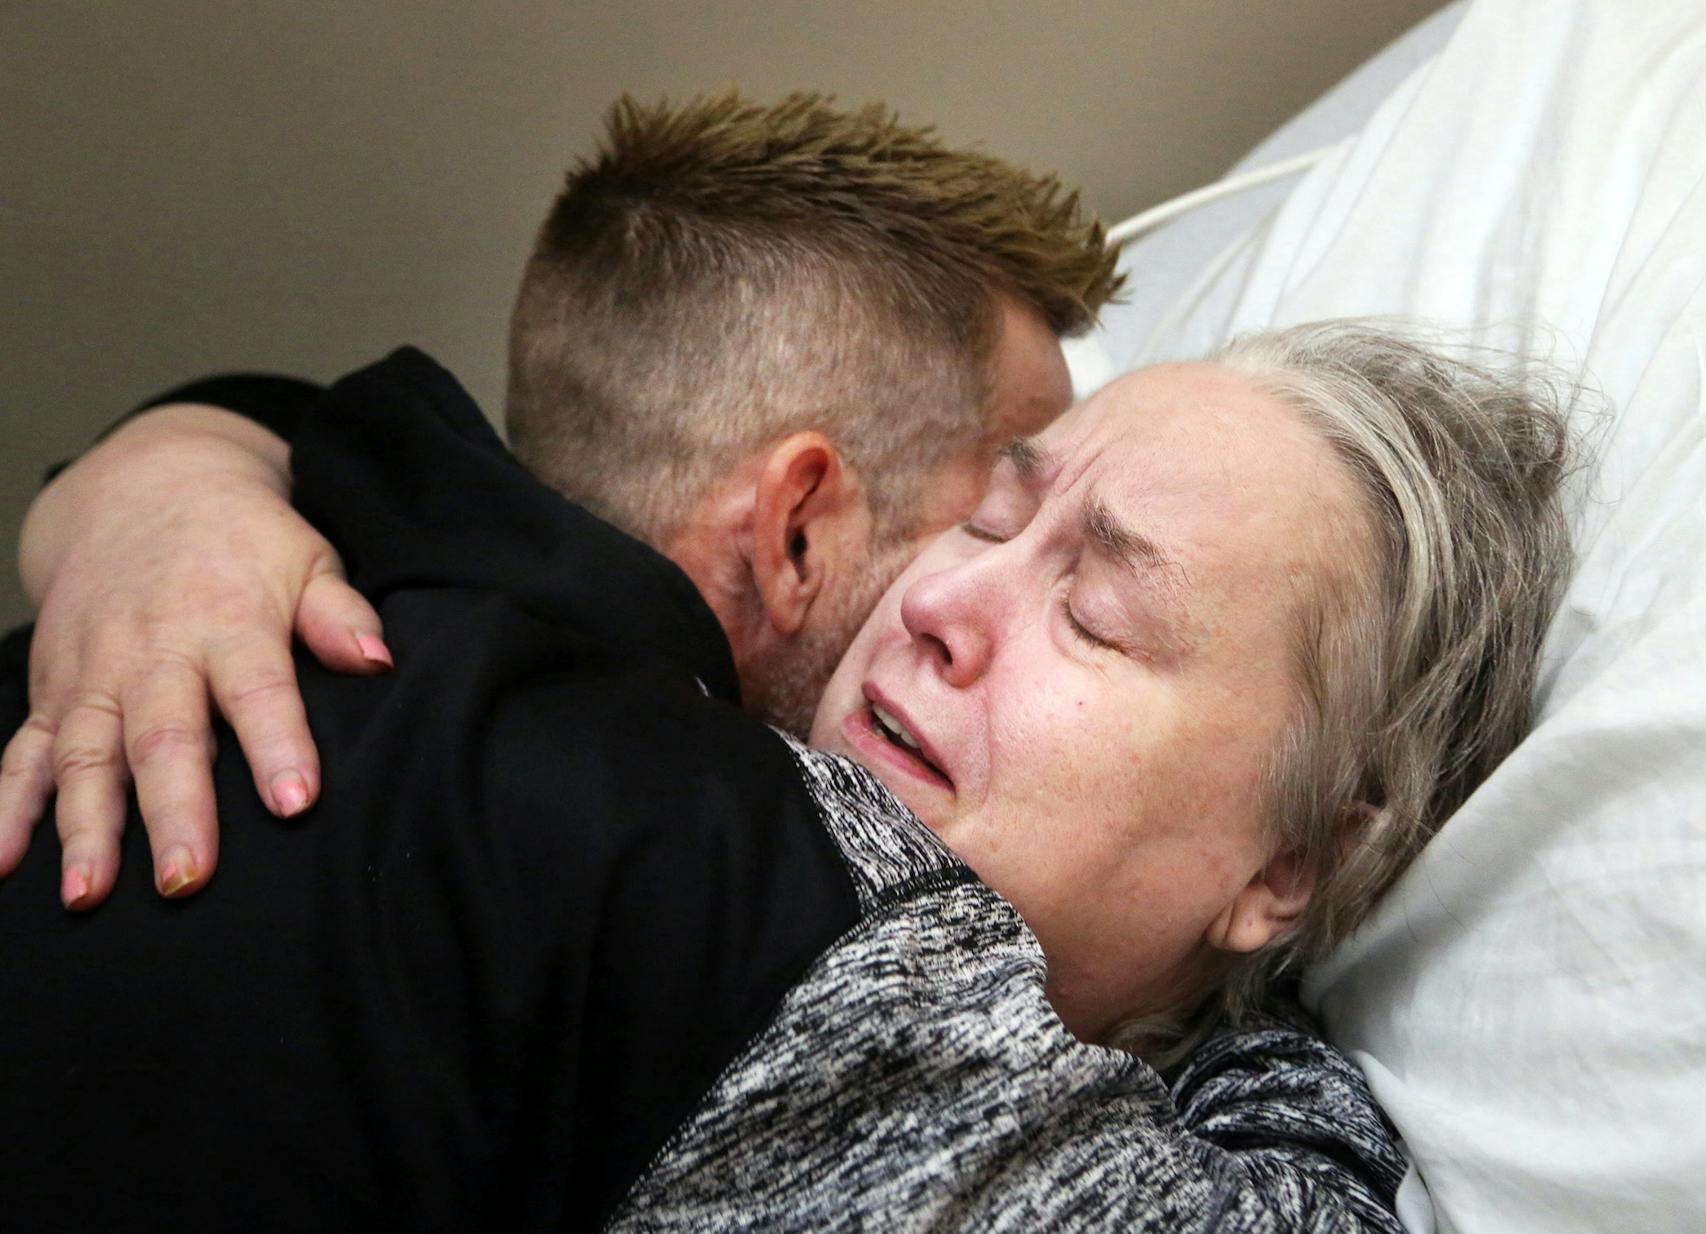 Suzanne Edwards hugged her son, Kent, at her senior care home. After Kent Edwards saw video of aides taunting and abusing his mother, he moved her to a new facility. One of the aides was eventually sentenced to 12 days in jail.